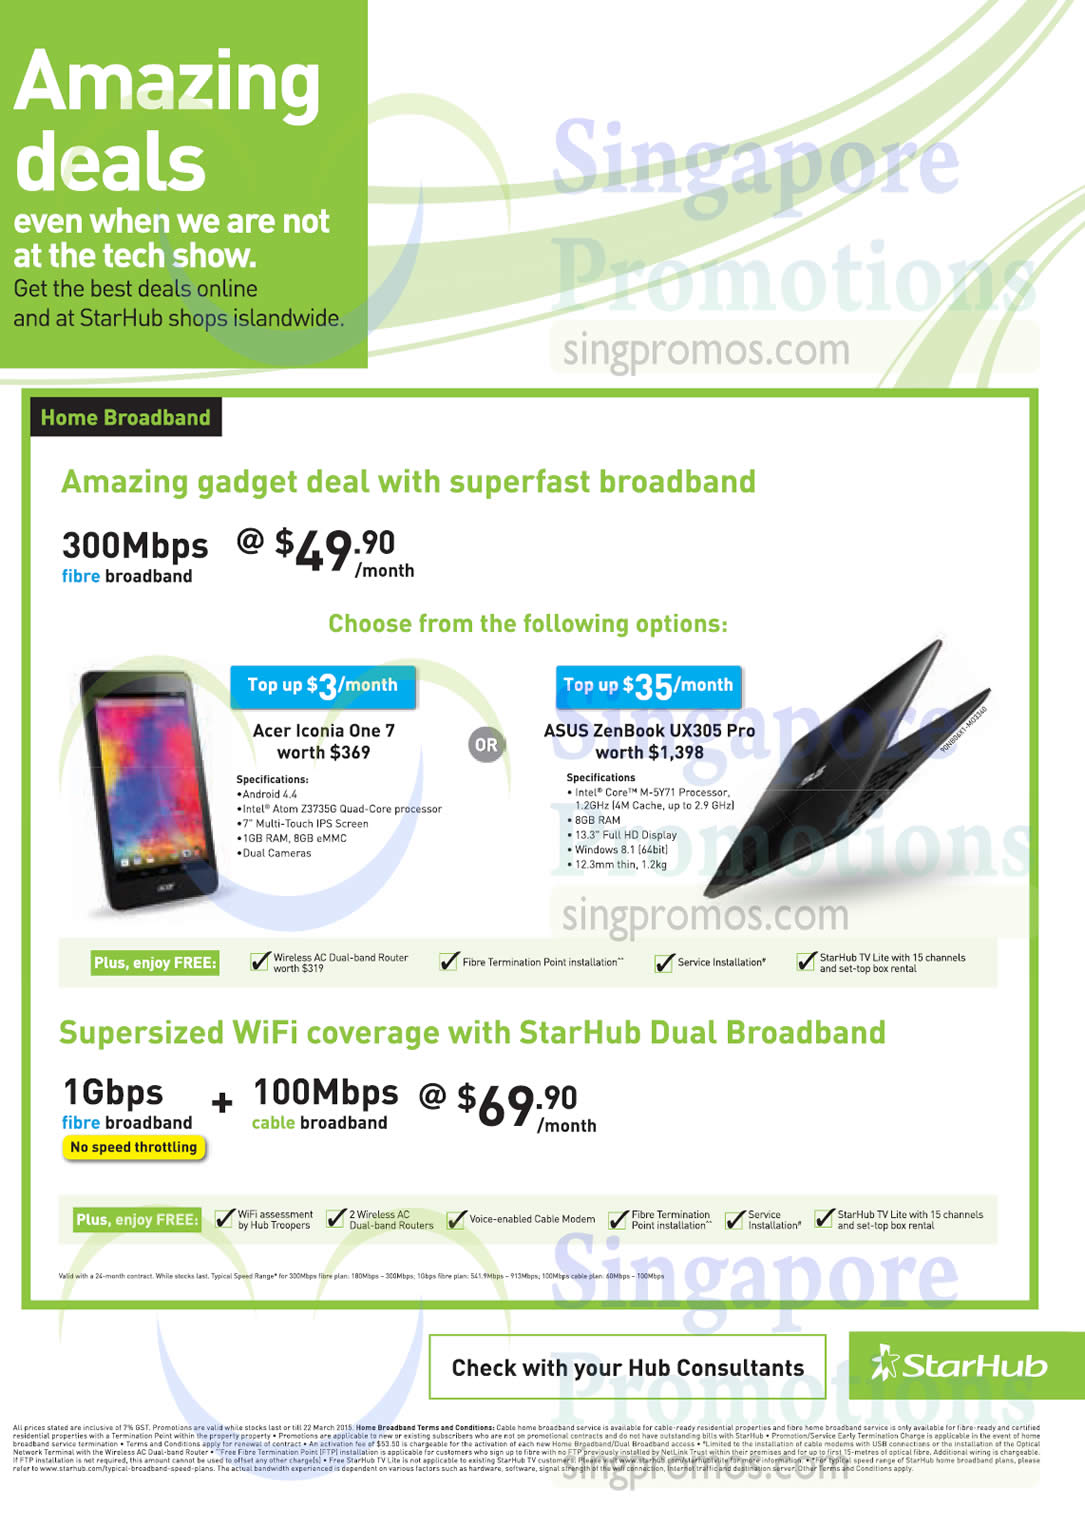 Featured image for Starhub Amazing Deals Smartphones, Tablets, Cable TV & Broadband Offers 9 - 22 Mar 2015